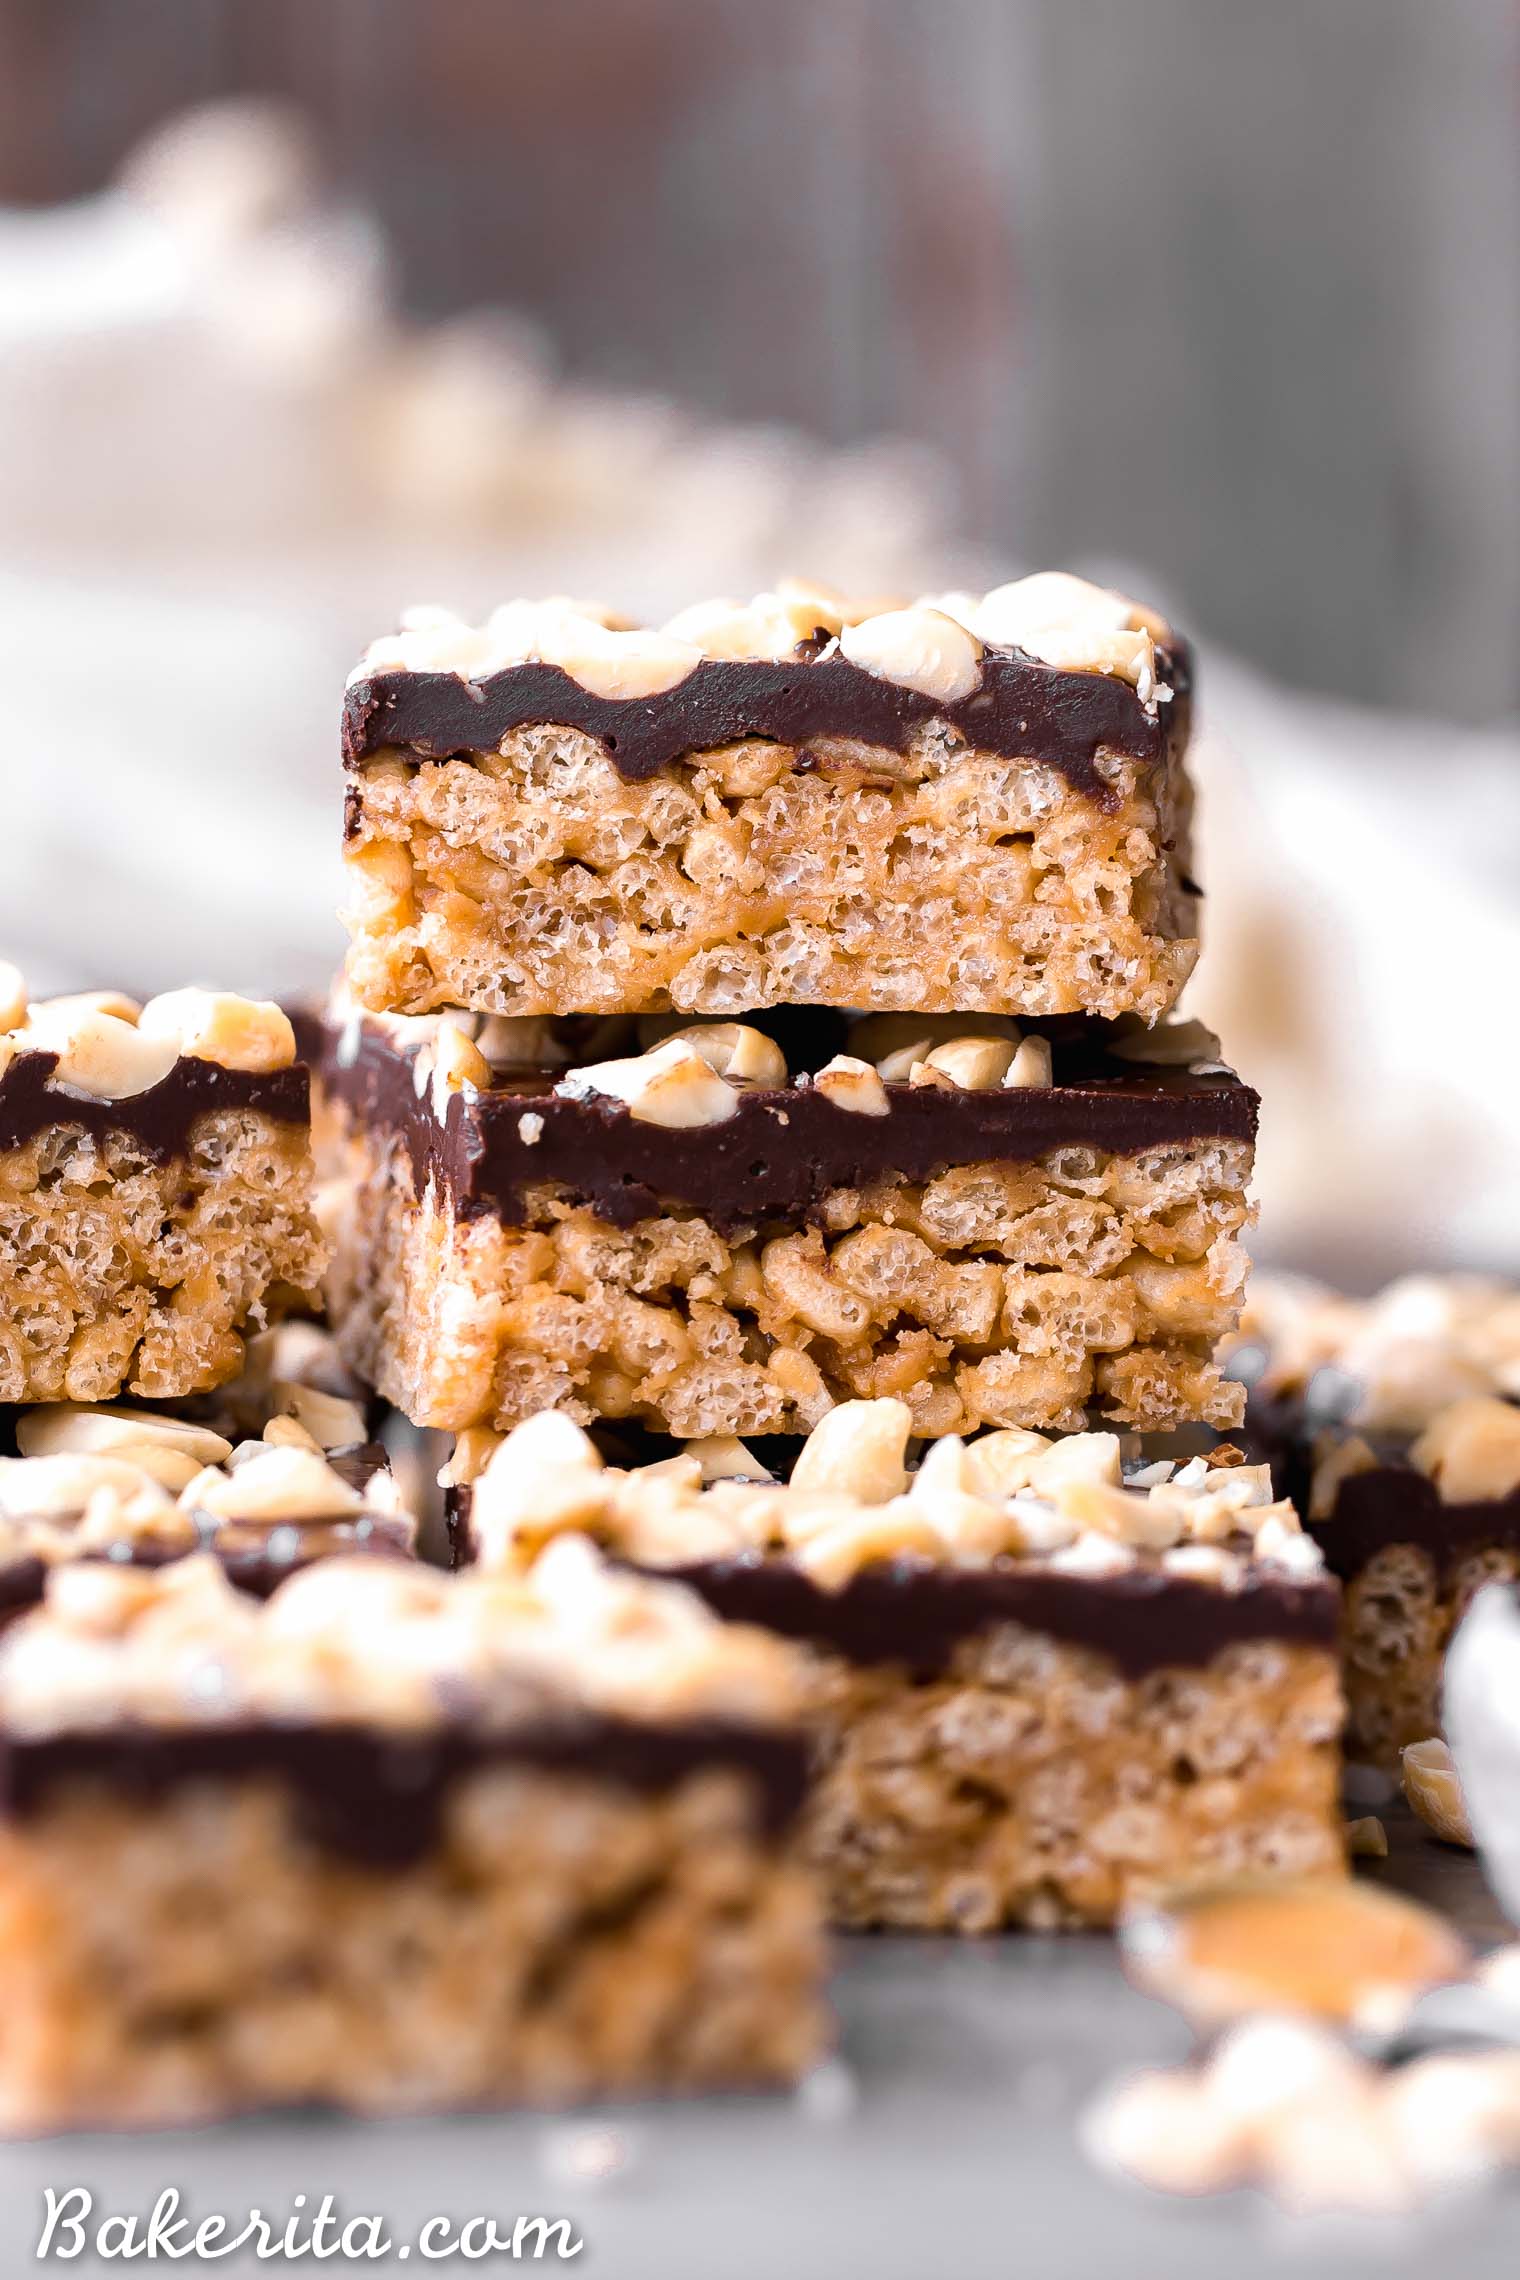 These Chocolate Peanut Butter Crispy Bars are crunchy peanut butter perfection, and you only need FIVE ingredients to make them! These gluten-free and vegan crispy bars are sure to satisfy your chocolate peanut butter cravings.